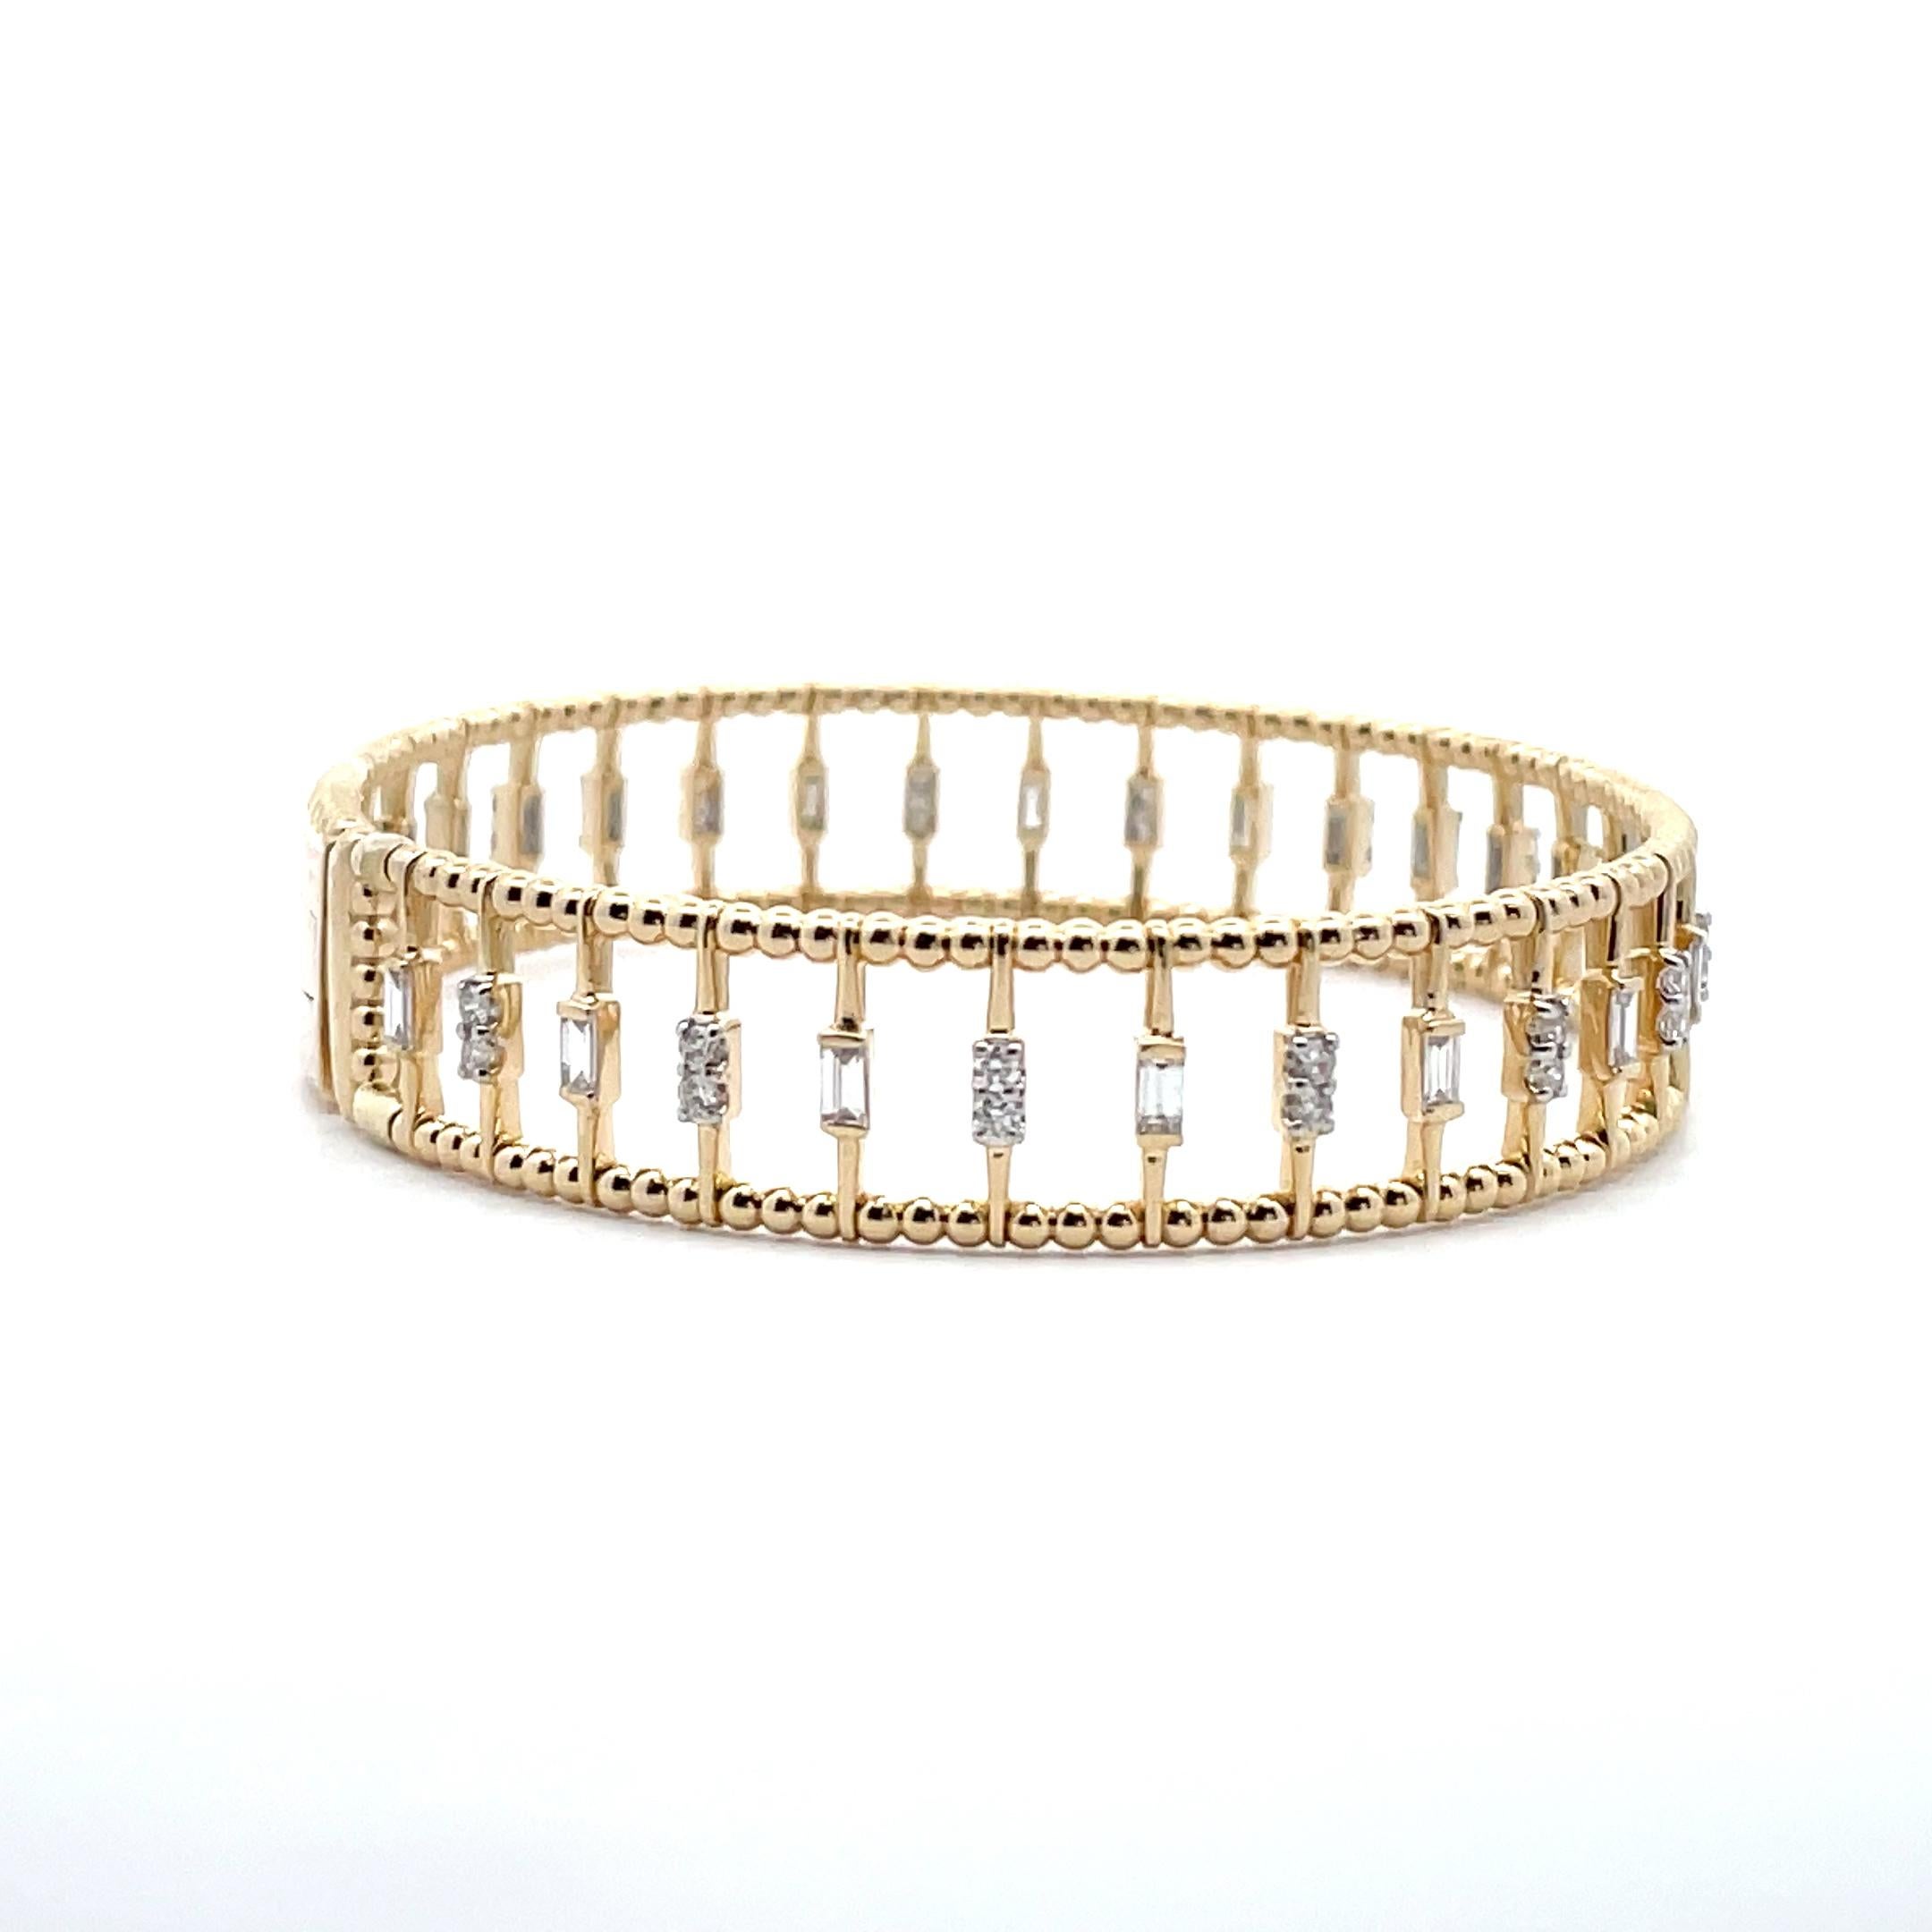 Delicate yet bold, our 1.14 ct. Baguette & Round Diamond Gold Beaded Cage Bangle is the perfect balance of both. Handcrafted by a professional artisan, this beautiful piece arrives ready to wear in its elegant gold box. This timeless piece makes an